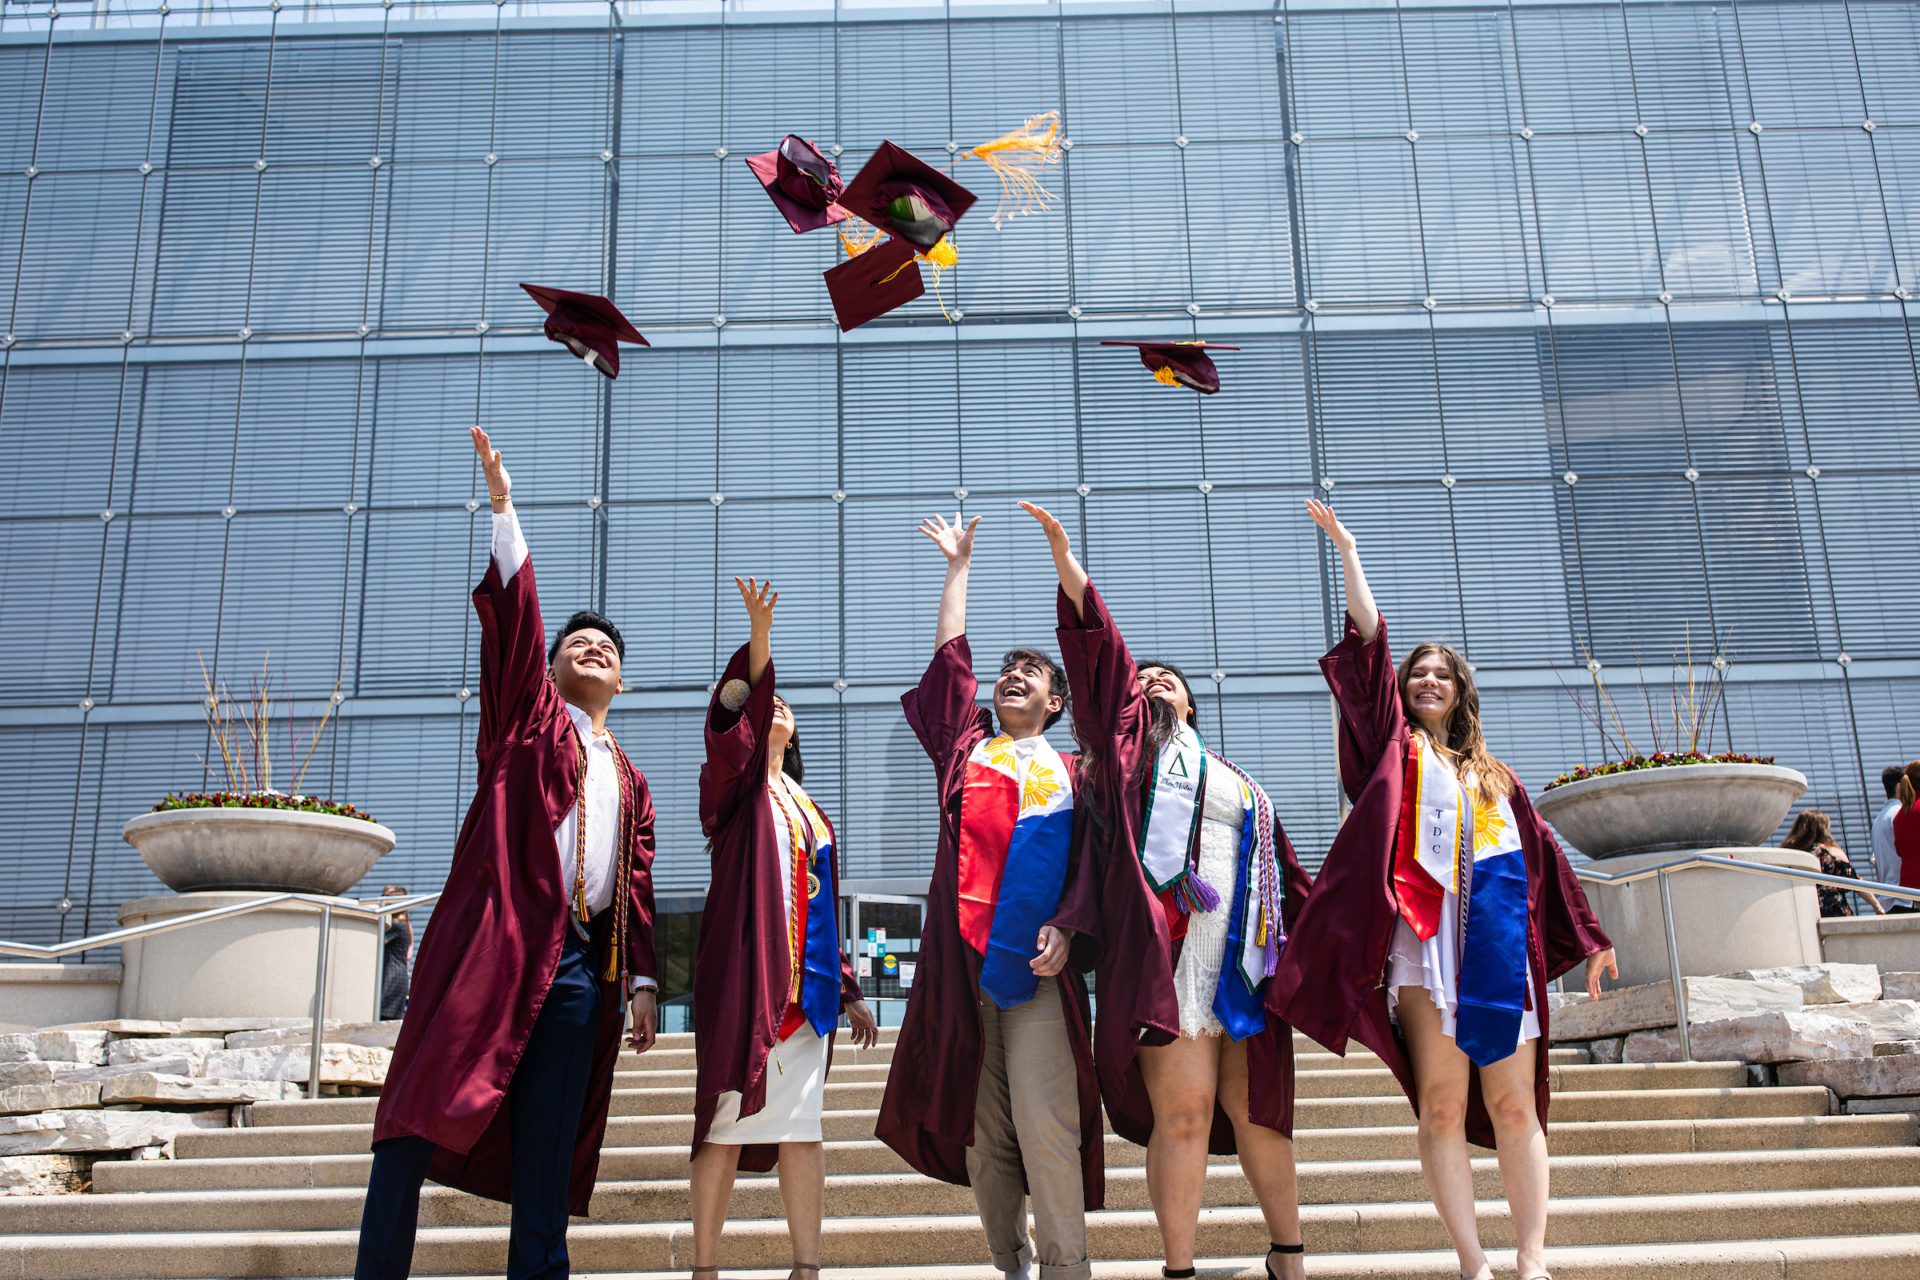 A group of Loyola University Chicago graduates wearing graduation regalia smile and toss their graduation caps into the air